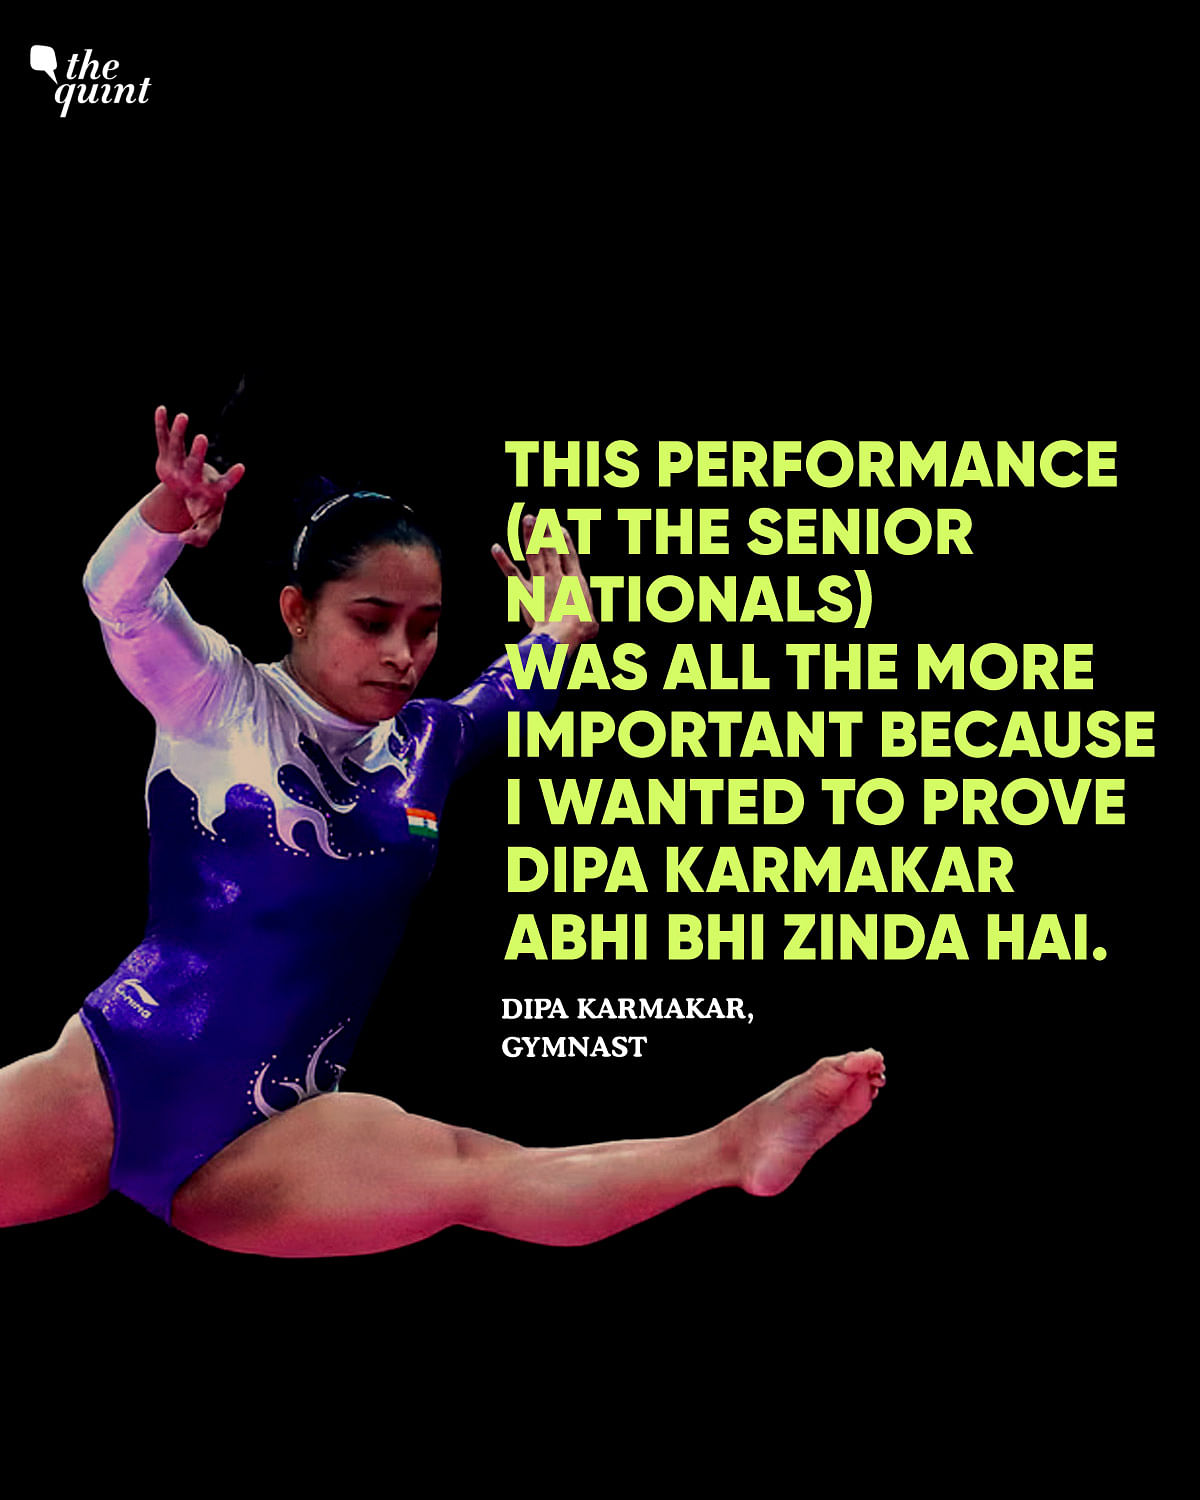 After innumerable injuries and a suspension, India's #gymnastics star, #DipaKarmakar is back – with three medals.